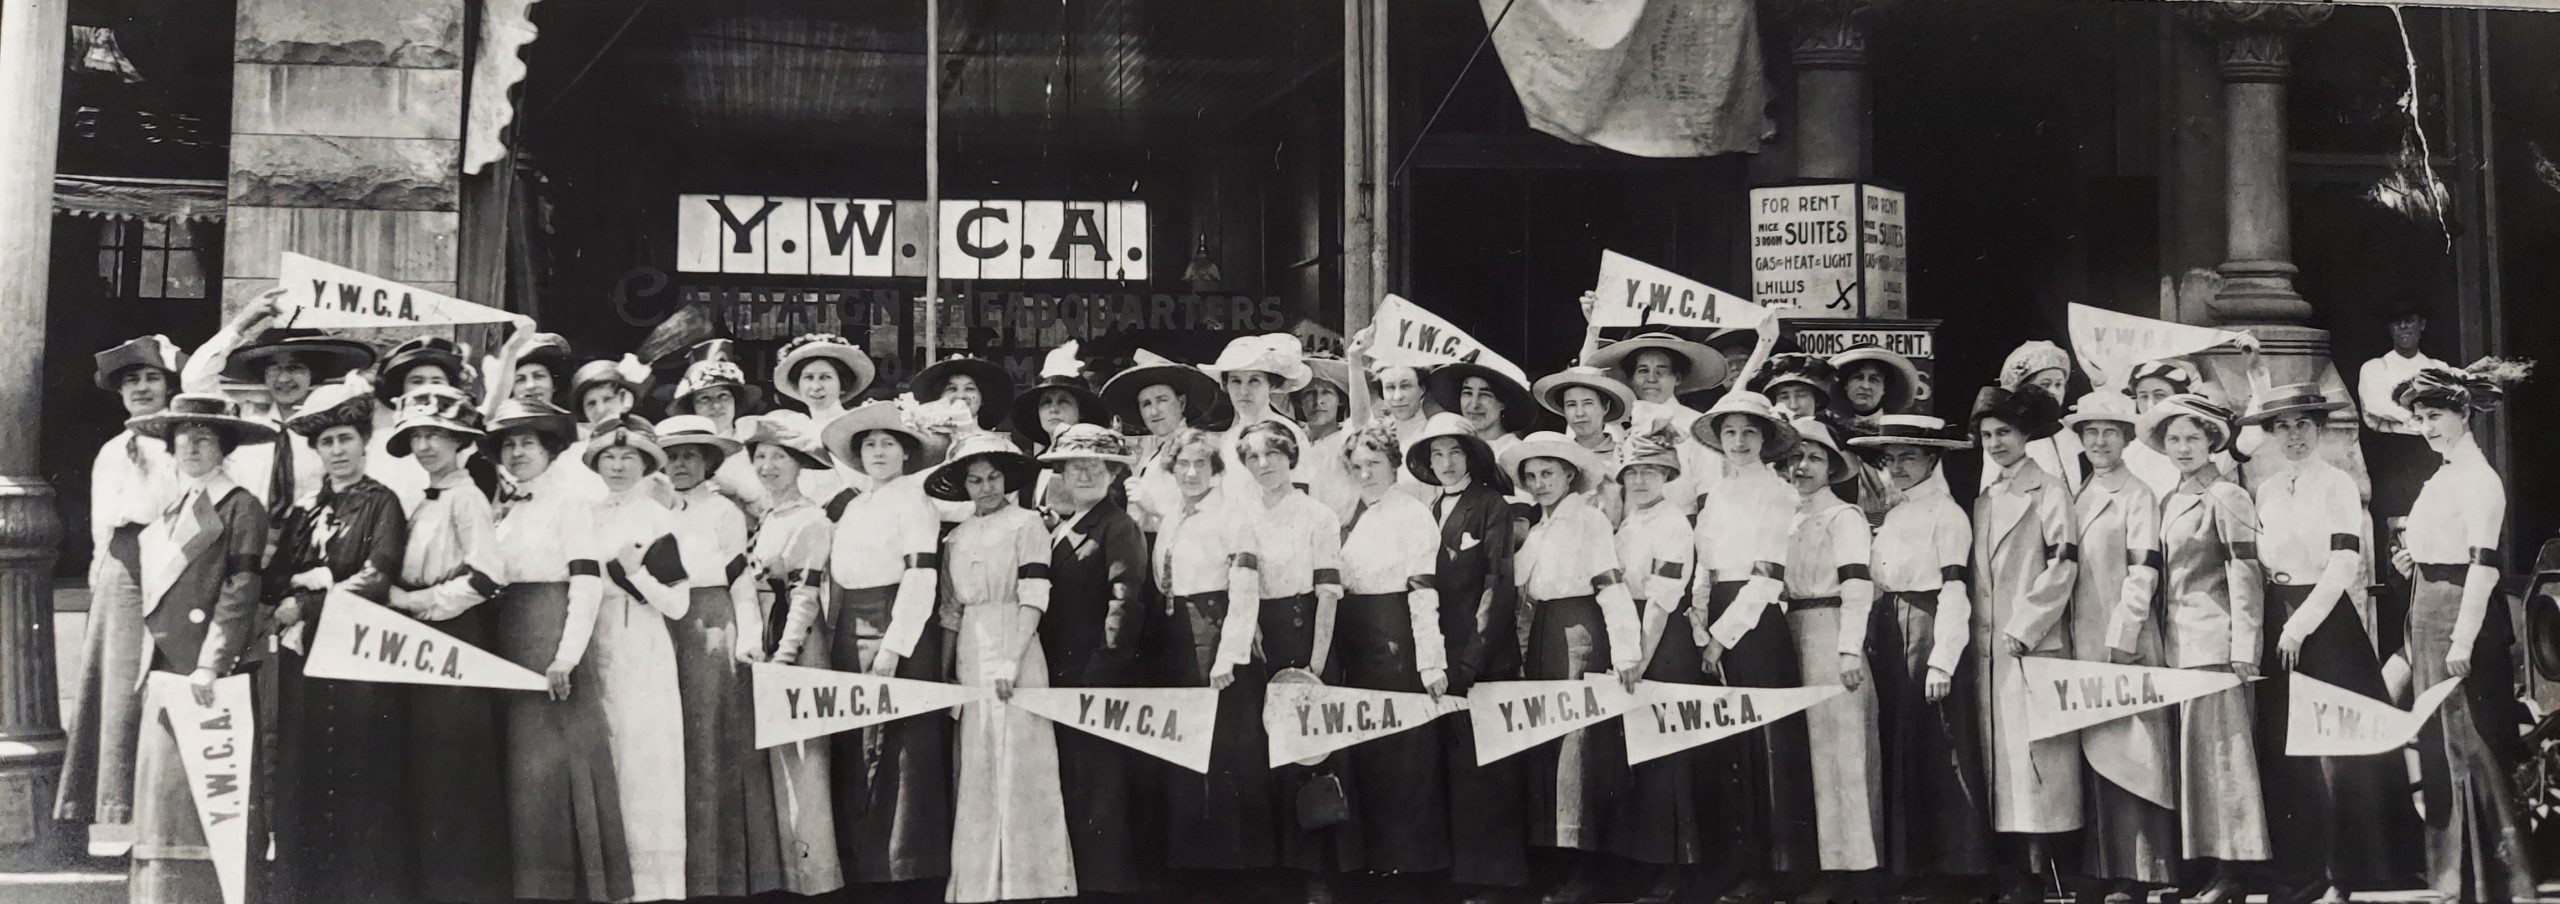 large group of women all wearing dresses and hats standing in front of YWCA building